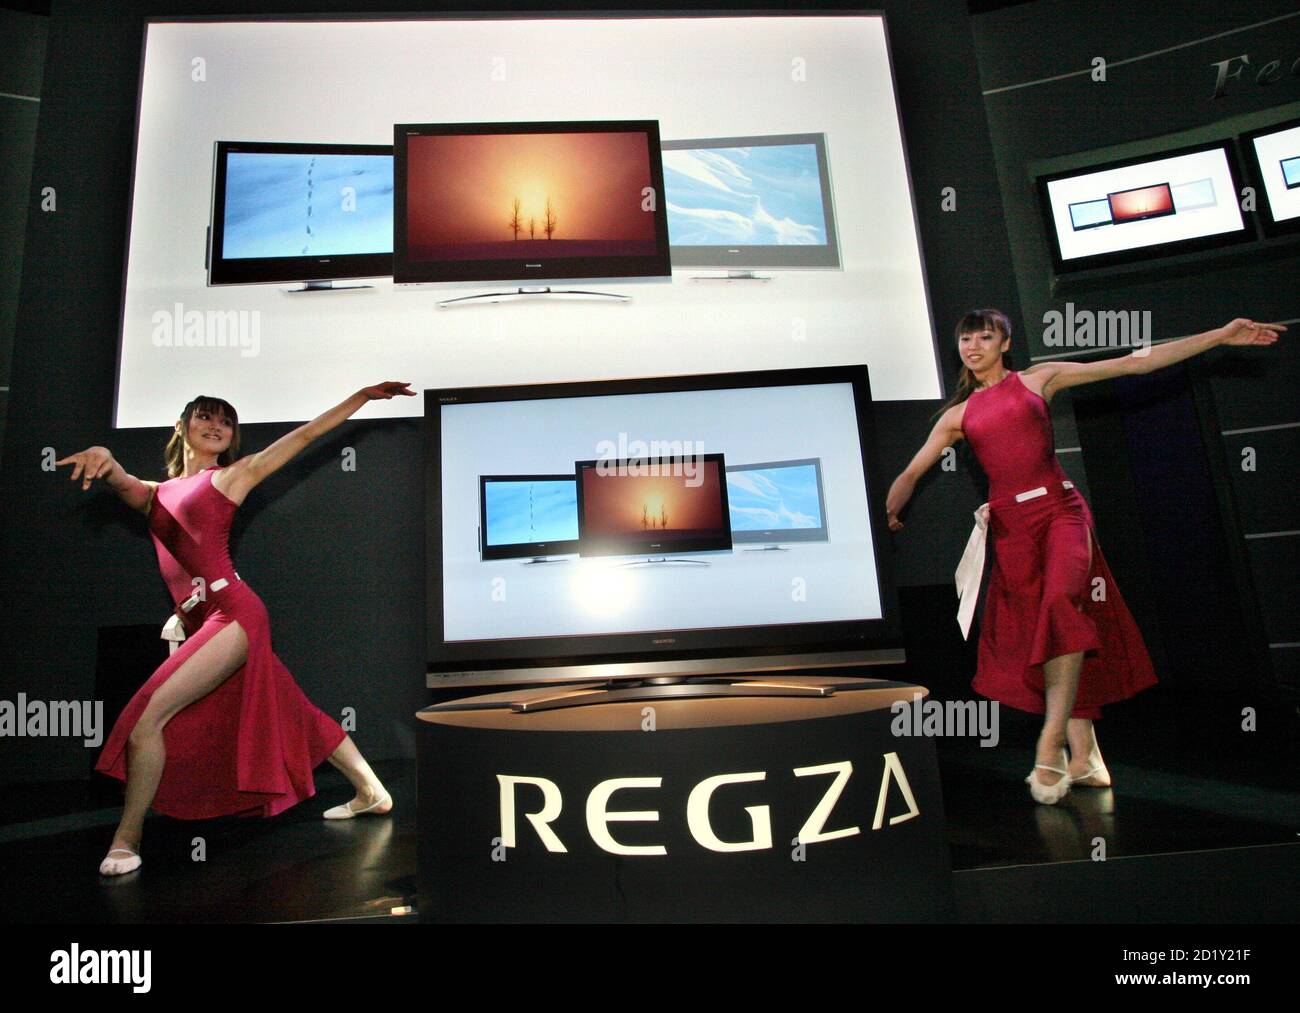 Models perform next to a flat-panel TV Regza at Japan's biggest technology trade show (CEATEC) in Makuhari, northeast of Tokyo in this October 3, 2006 file photo. Forget the giant flat-screen TVs and snazzy mobile phones. At Japan's biggest technology trade show on Friday, visitors aimed their cameras at the women in miniskirts lining up in front of the gadgets to wave visitors goodbye. For the women, too, these events are often more than just a decent paying part-time job.  REUTERS/Toshiyuki Aizawa/Files (JAPAN) Stock Photo